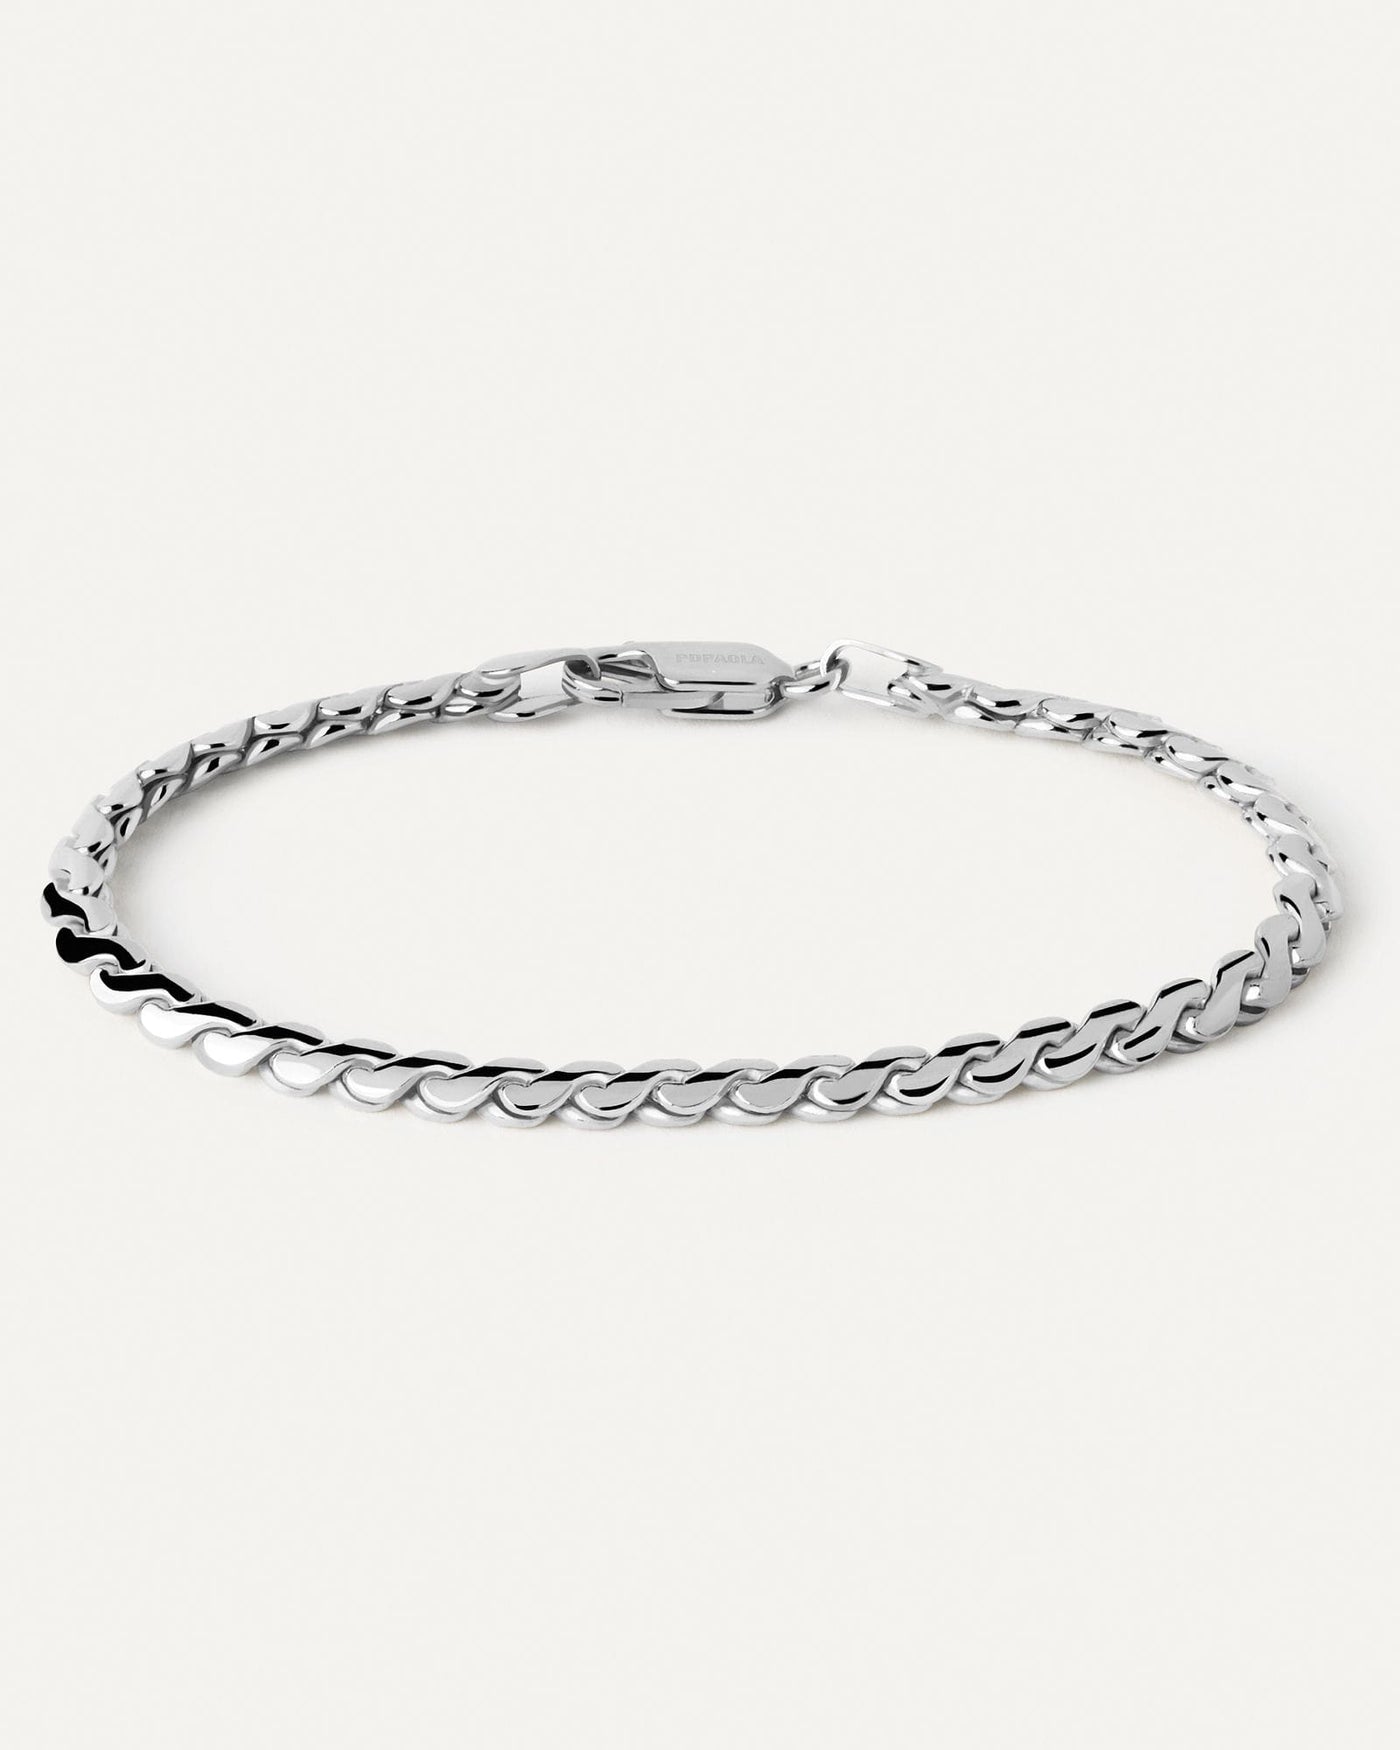 2024 Selection | Large Serpentine Silver Chain Bracelet. Modern serpentine silver thick chain bracelet with braided links. Get the latest arrival from PDPAOLA. Place your order safely and get this Best Seller. Free Shipping.